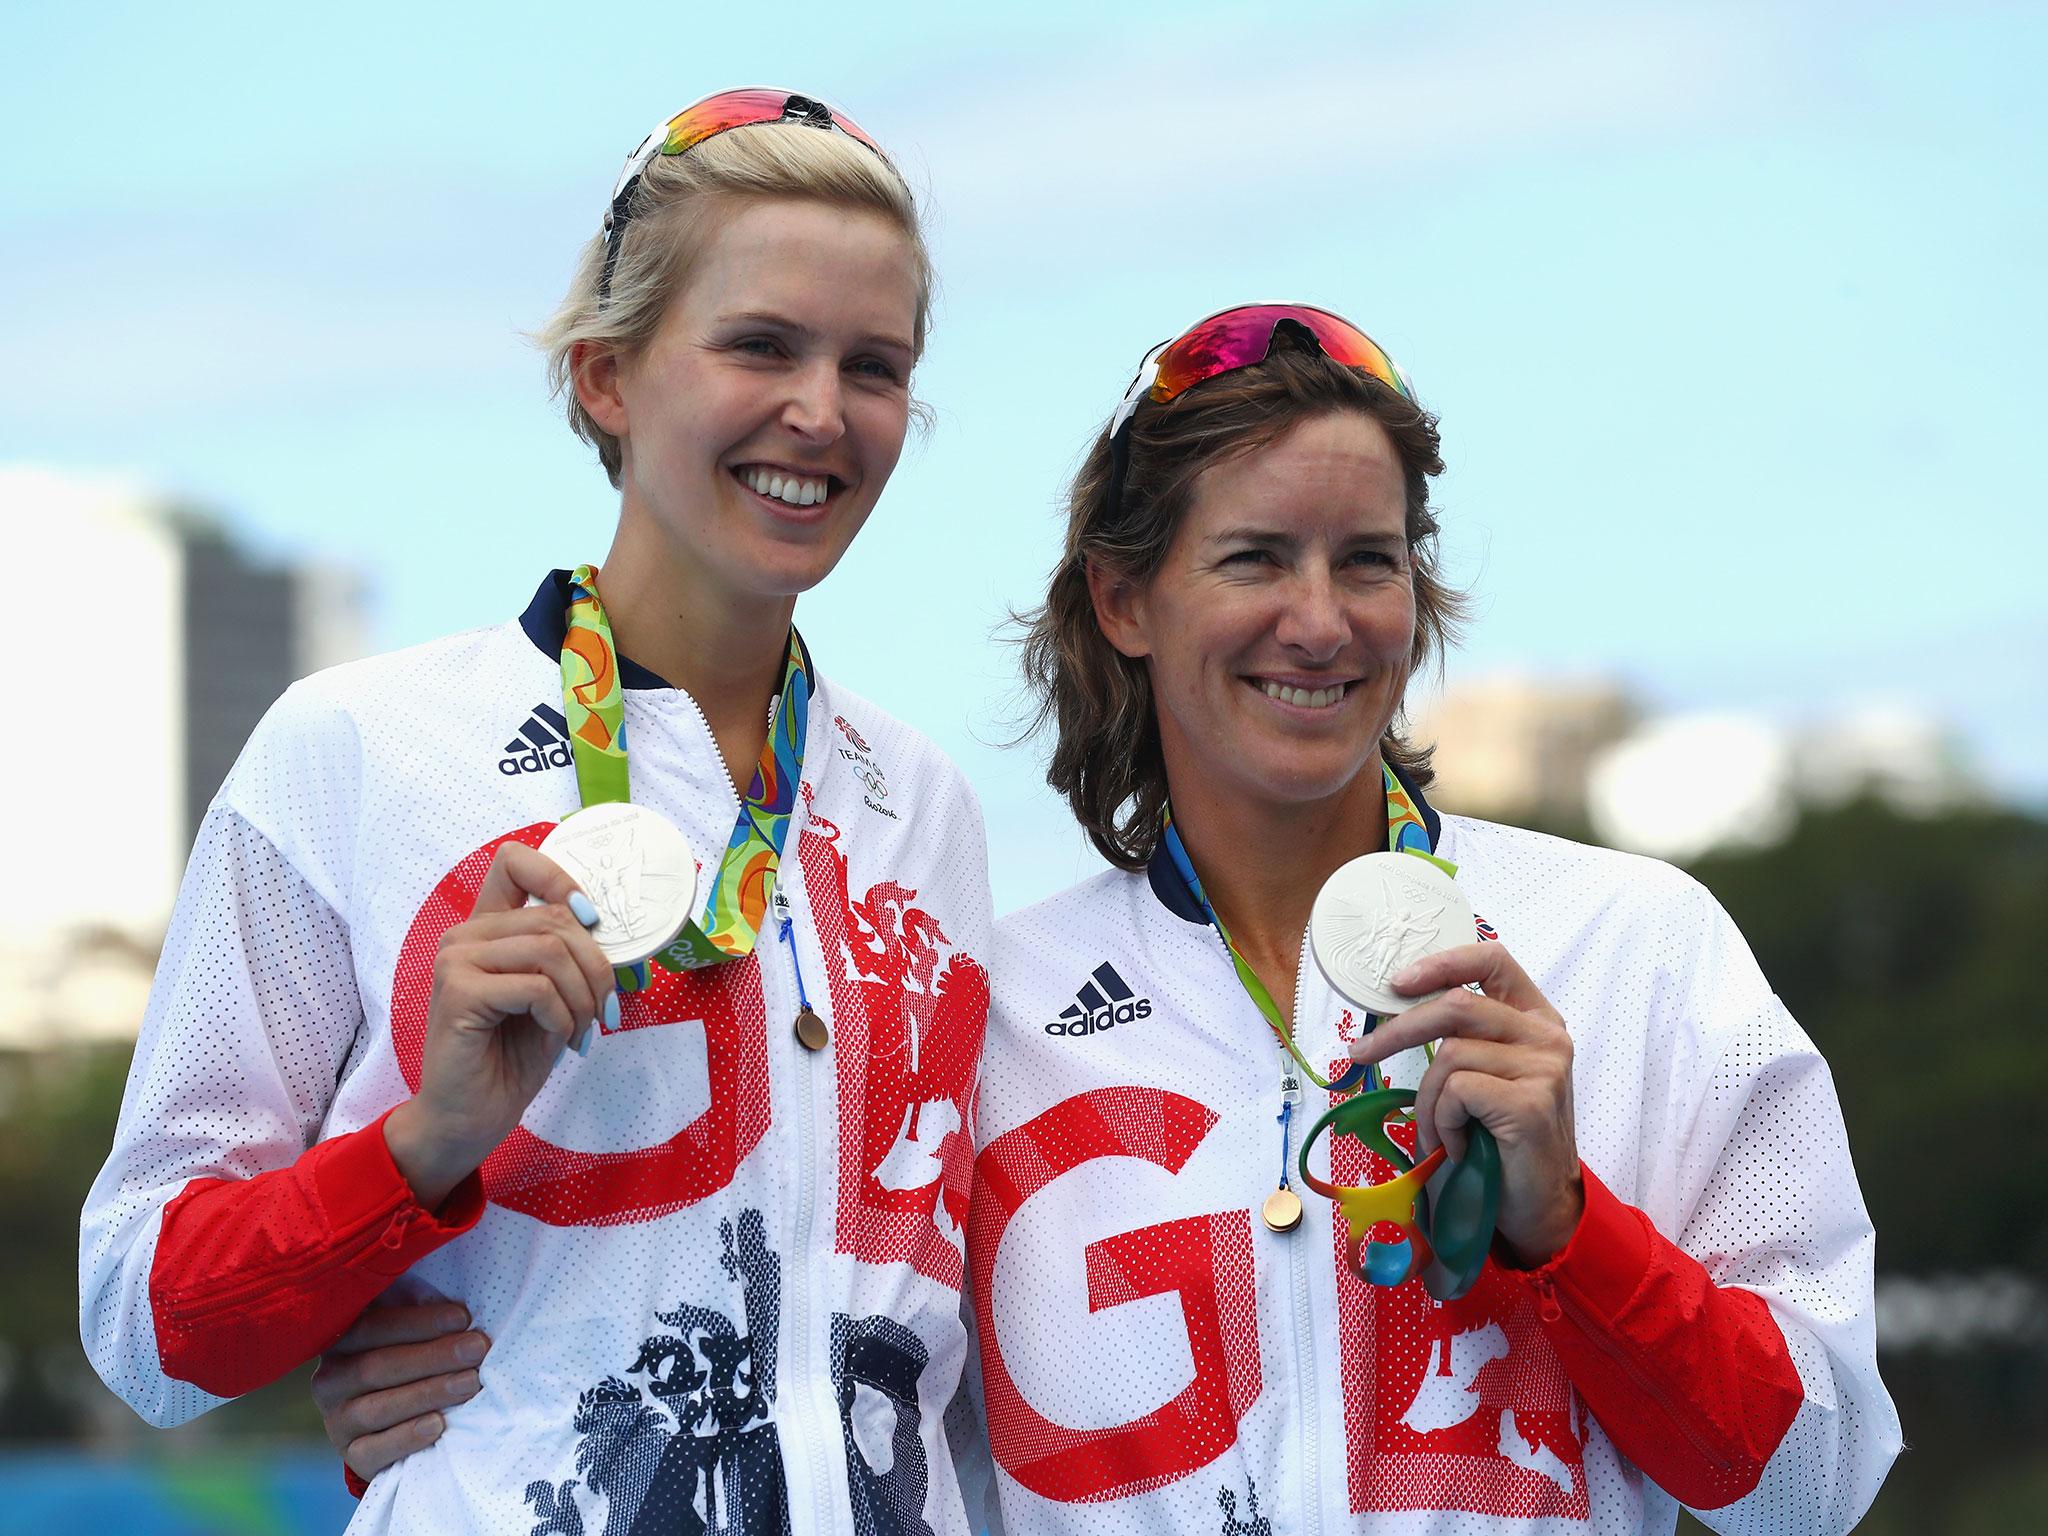 Great Britain's Victoria Thornley (left) and Katherine Grainger (right) pose with their silver medals after finishing second in the Women's Double Sculls Final A